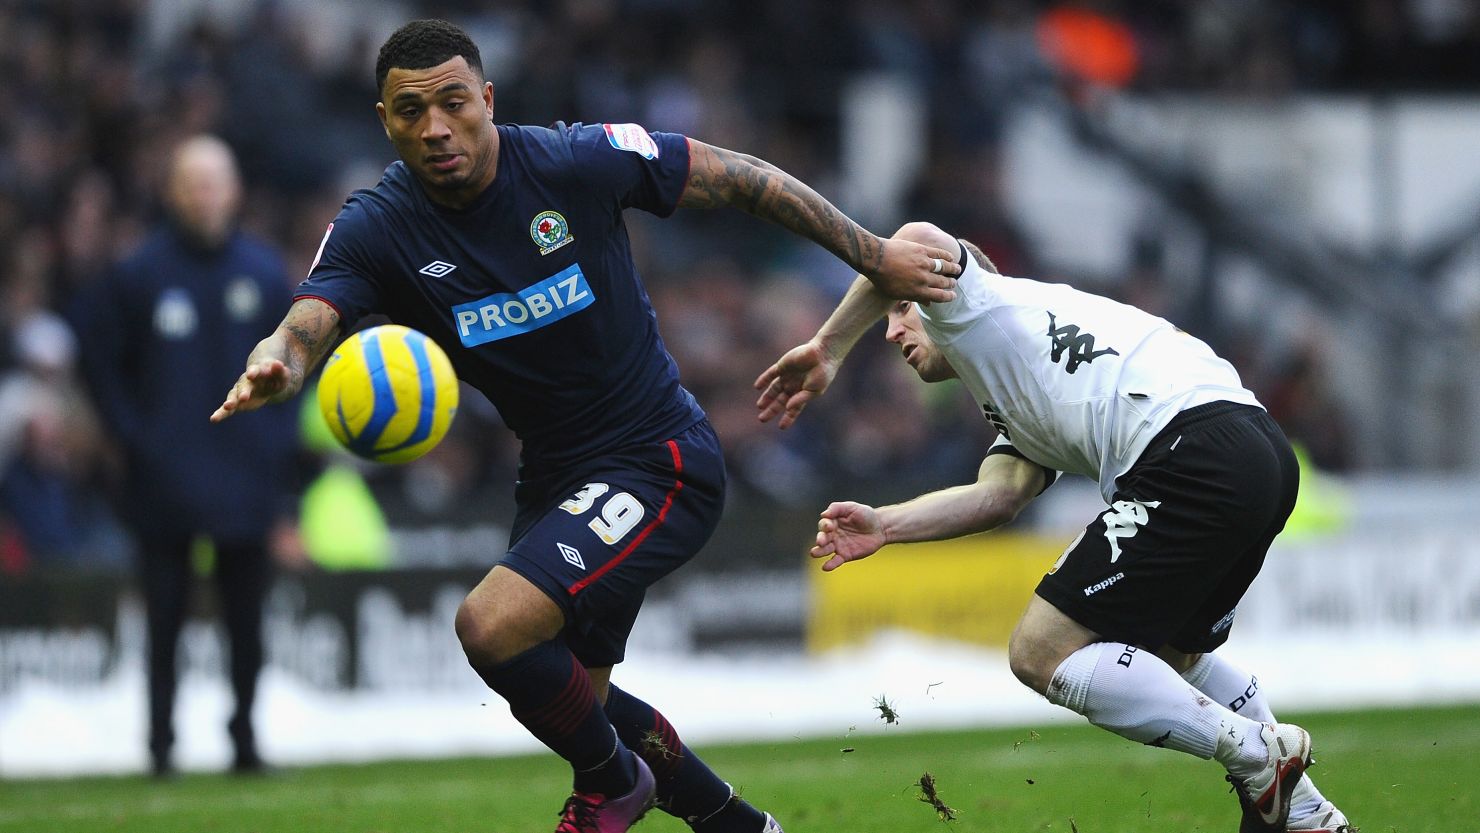 Colin Kazim-Richards has played in England, France, Greece and Turkey during his career.